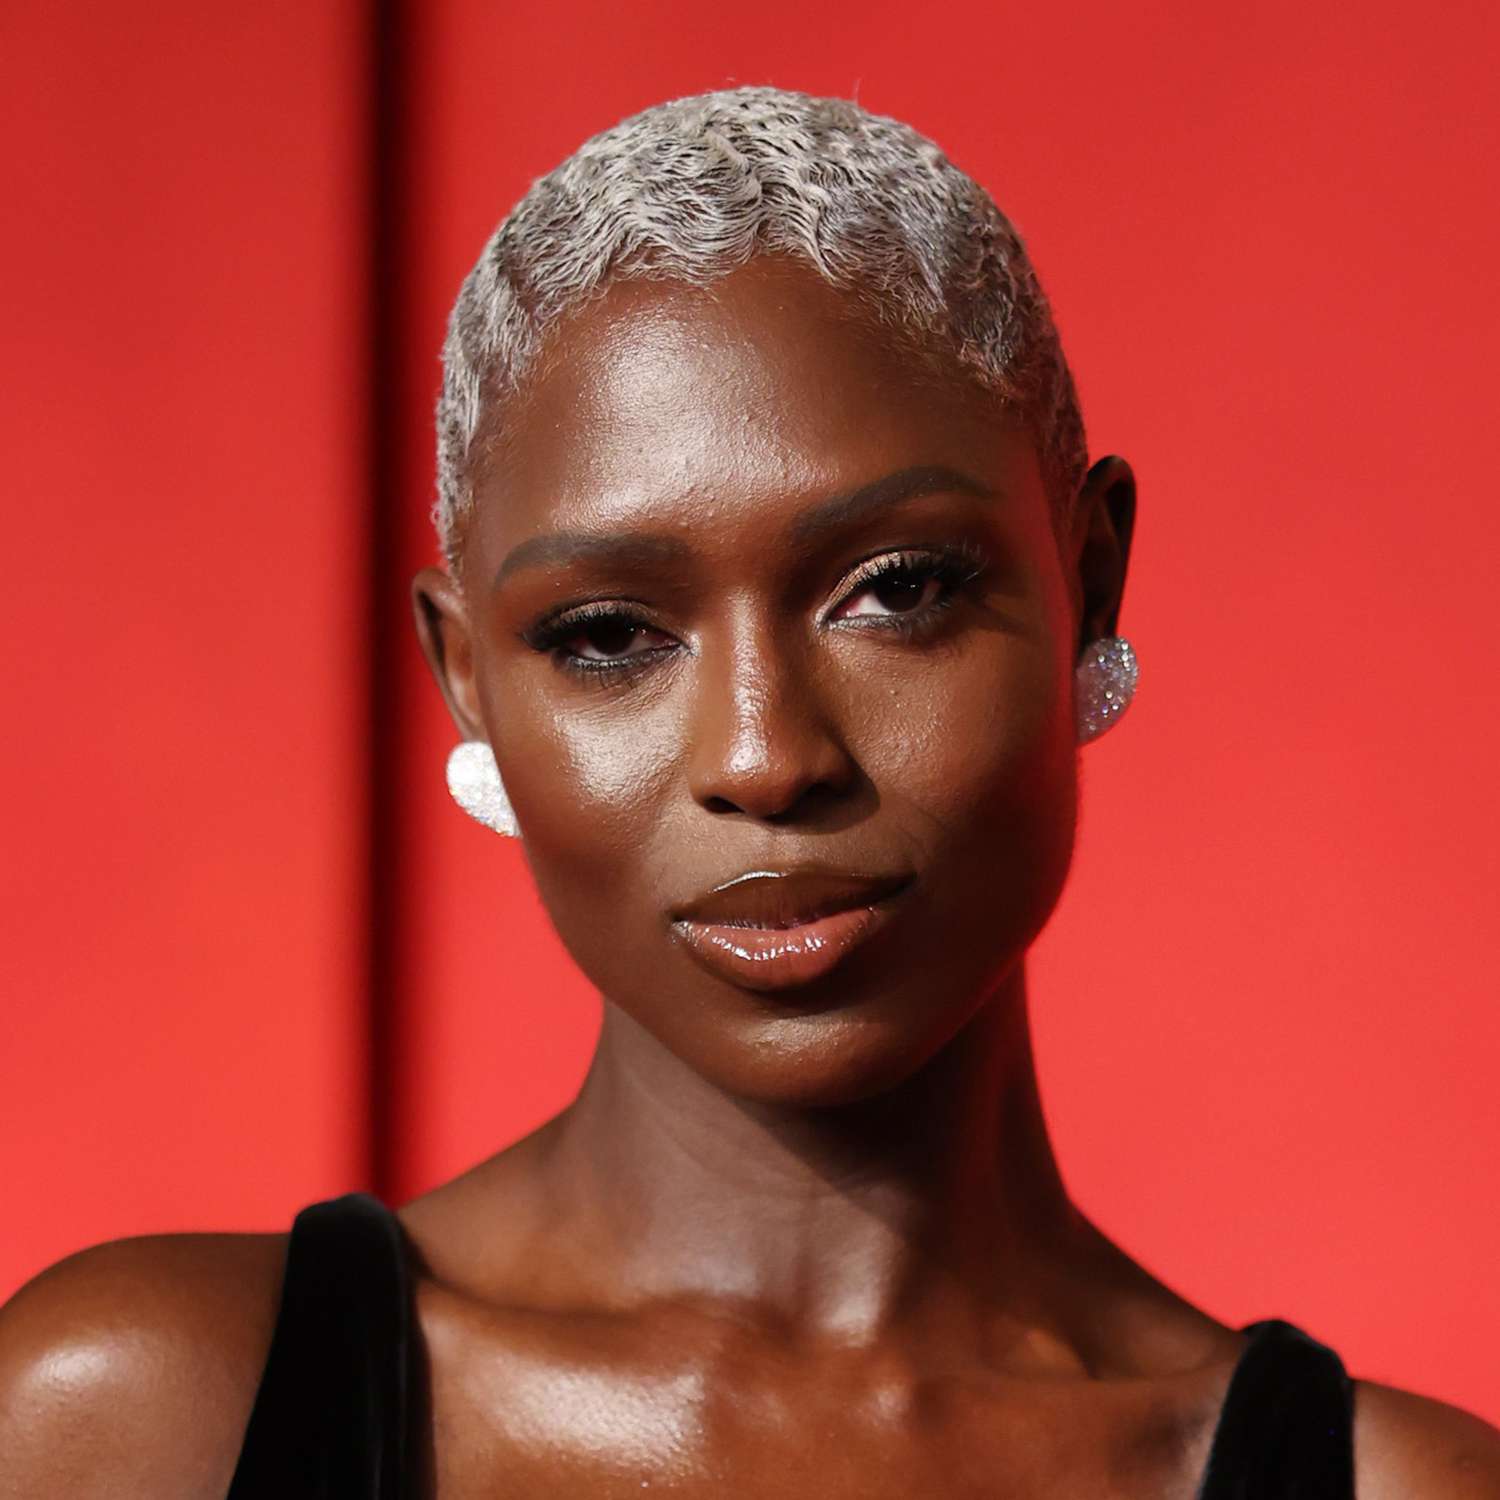 Jodie Turner-Smith attends the Vanity Fair Oscar party in an icy blonde, grown out buzz cut